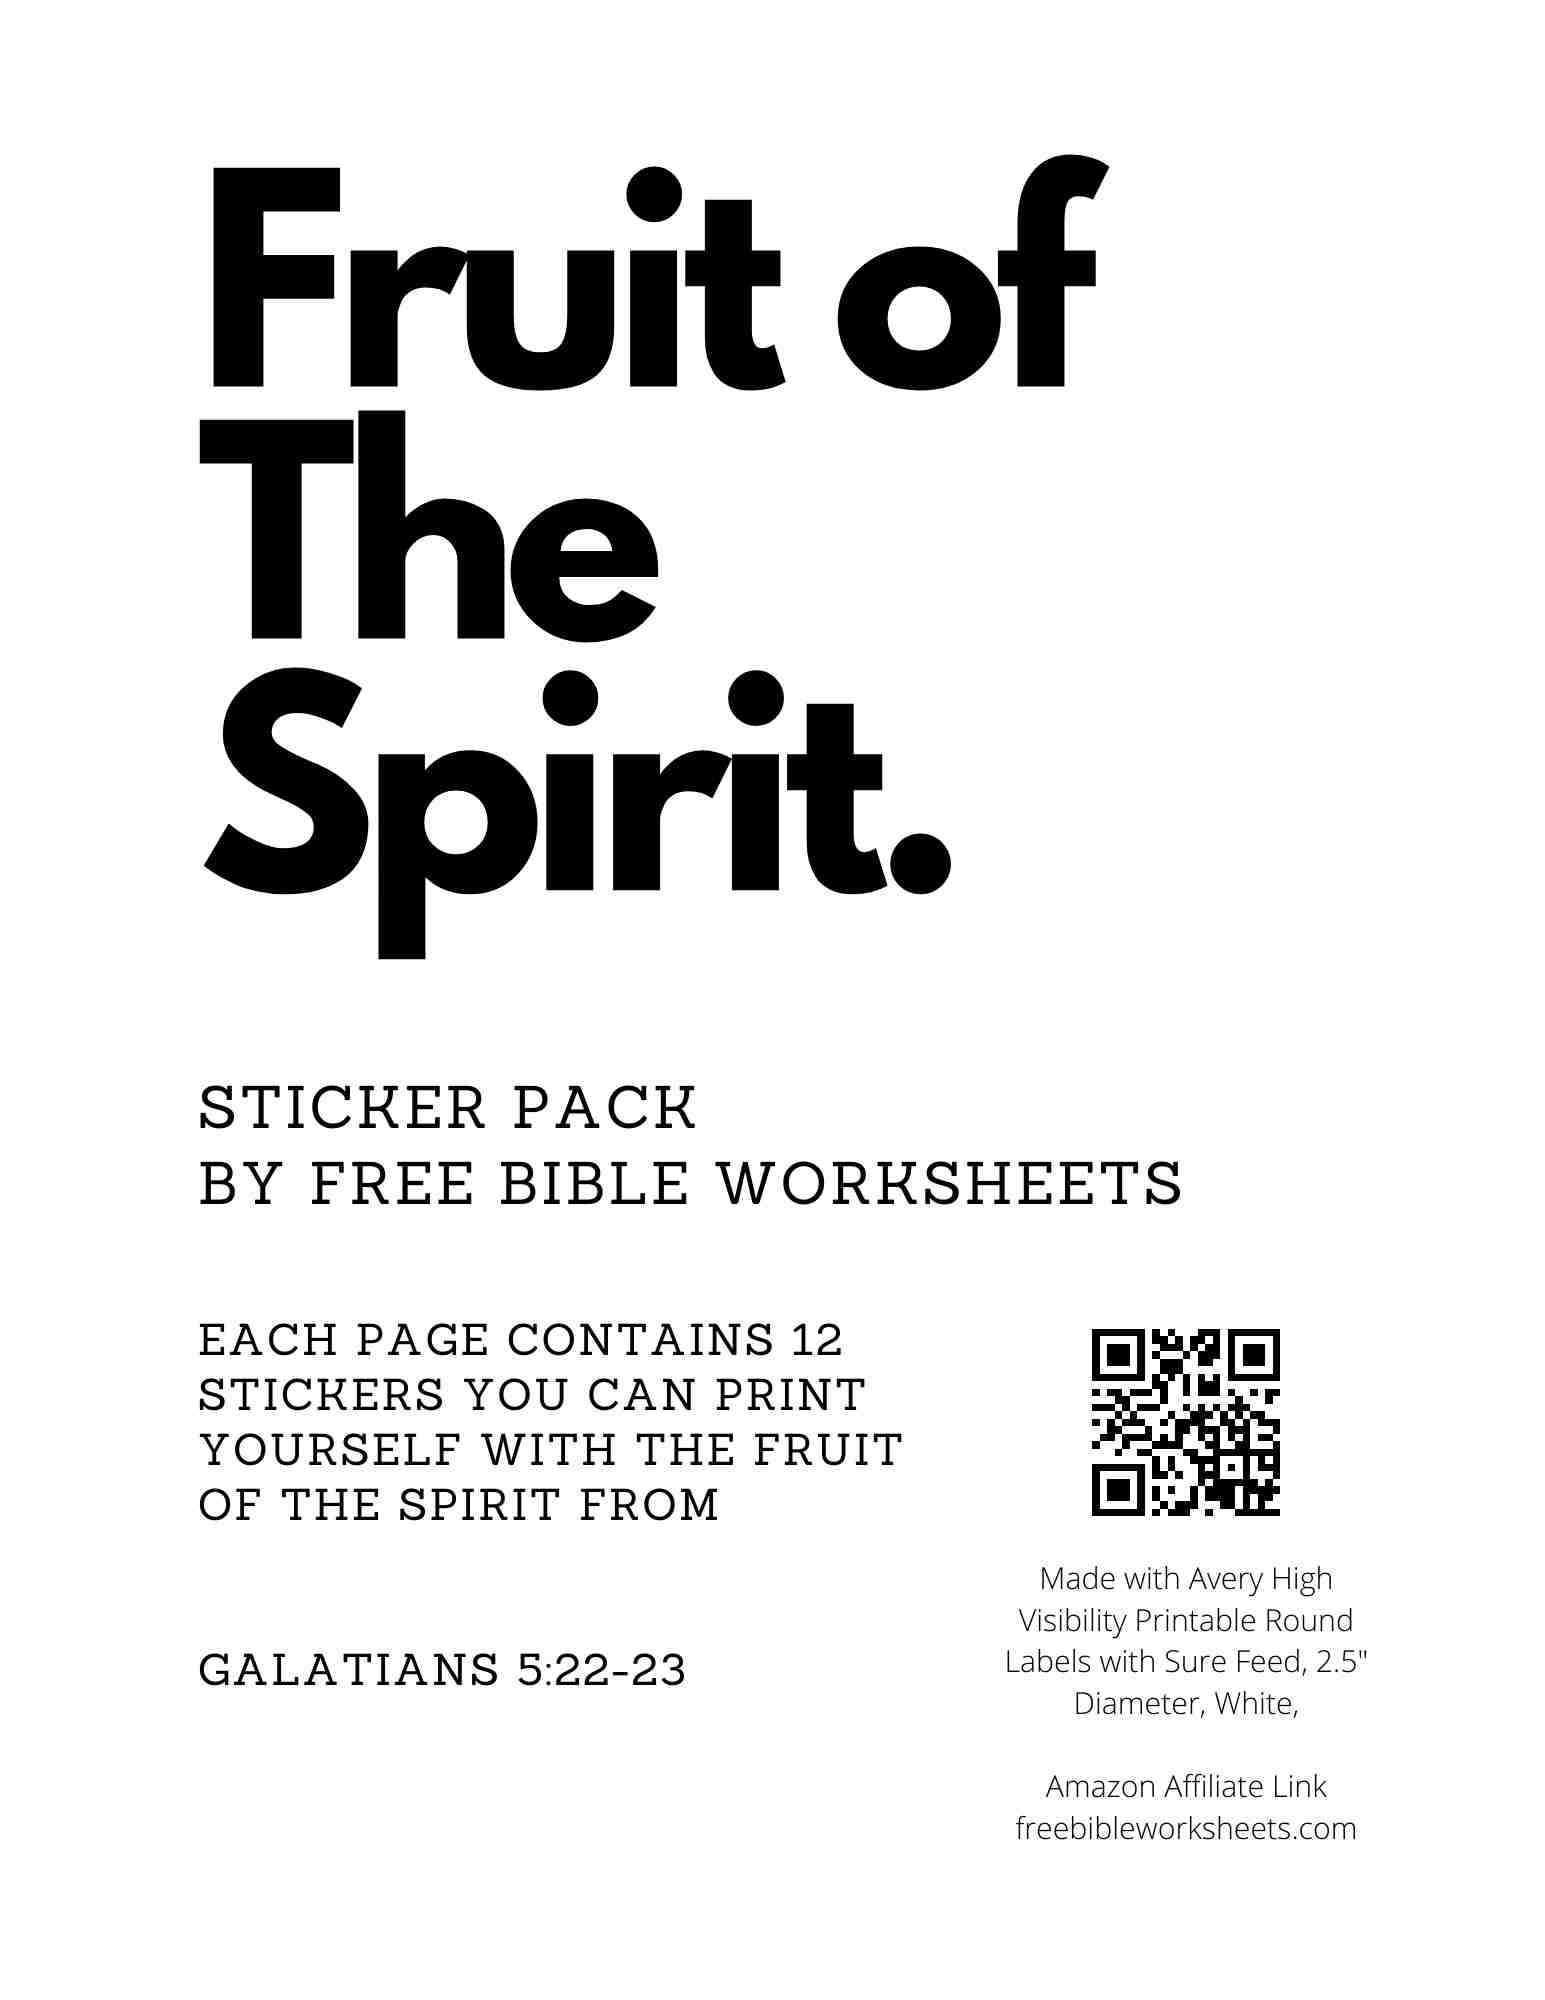 Fruit of the spirit stickers